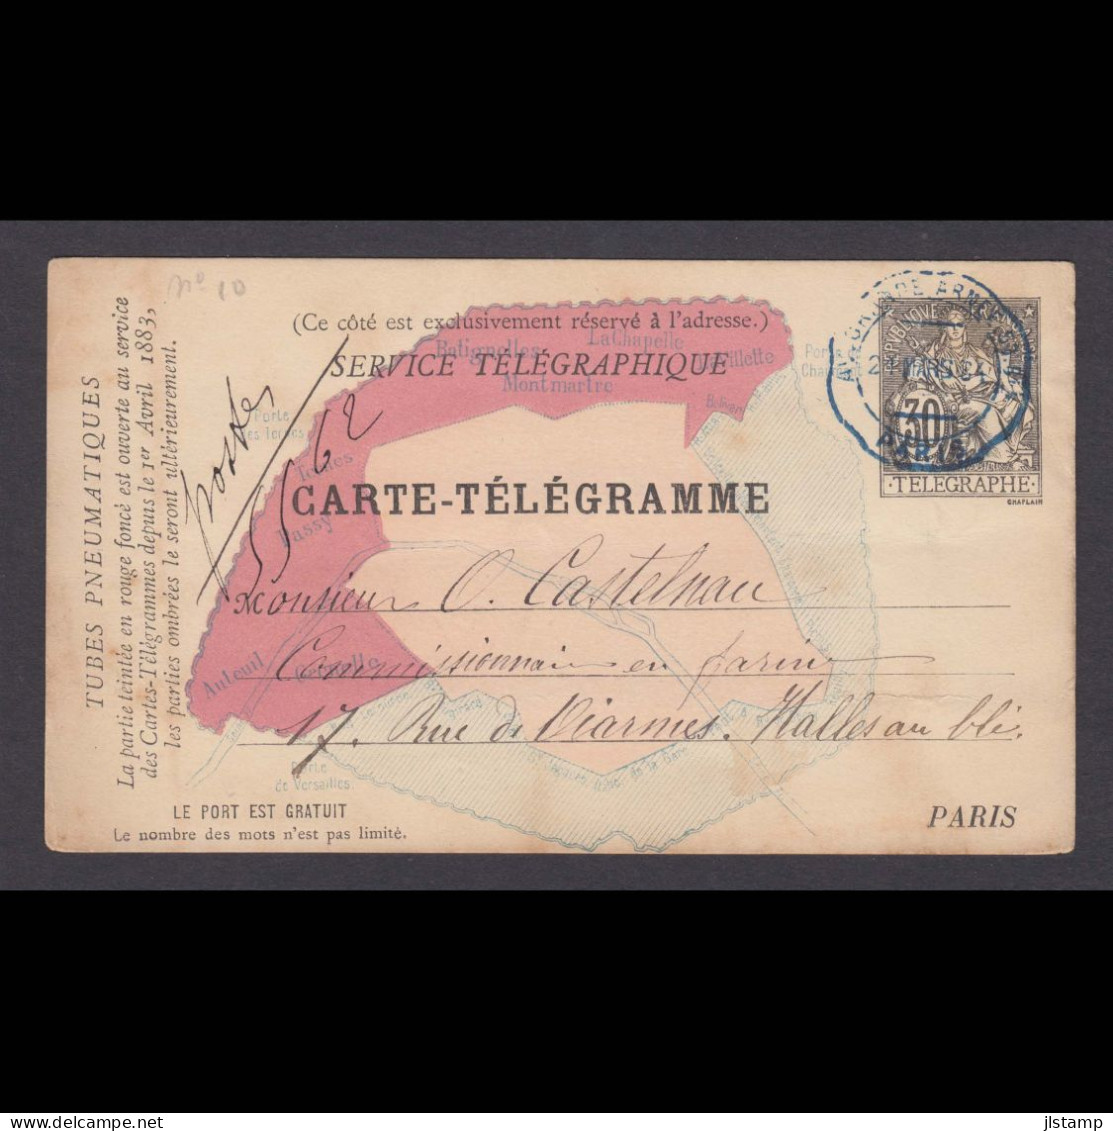 France 1883 Telegraphy Stationery 30c,Stamped Postcard,Used In 1884,VF - Sonderganzsachen